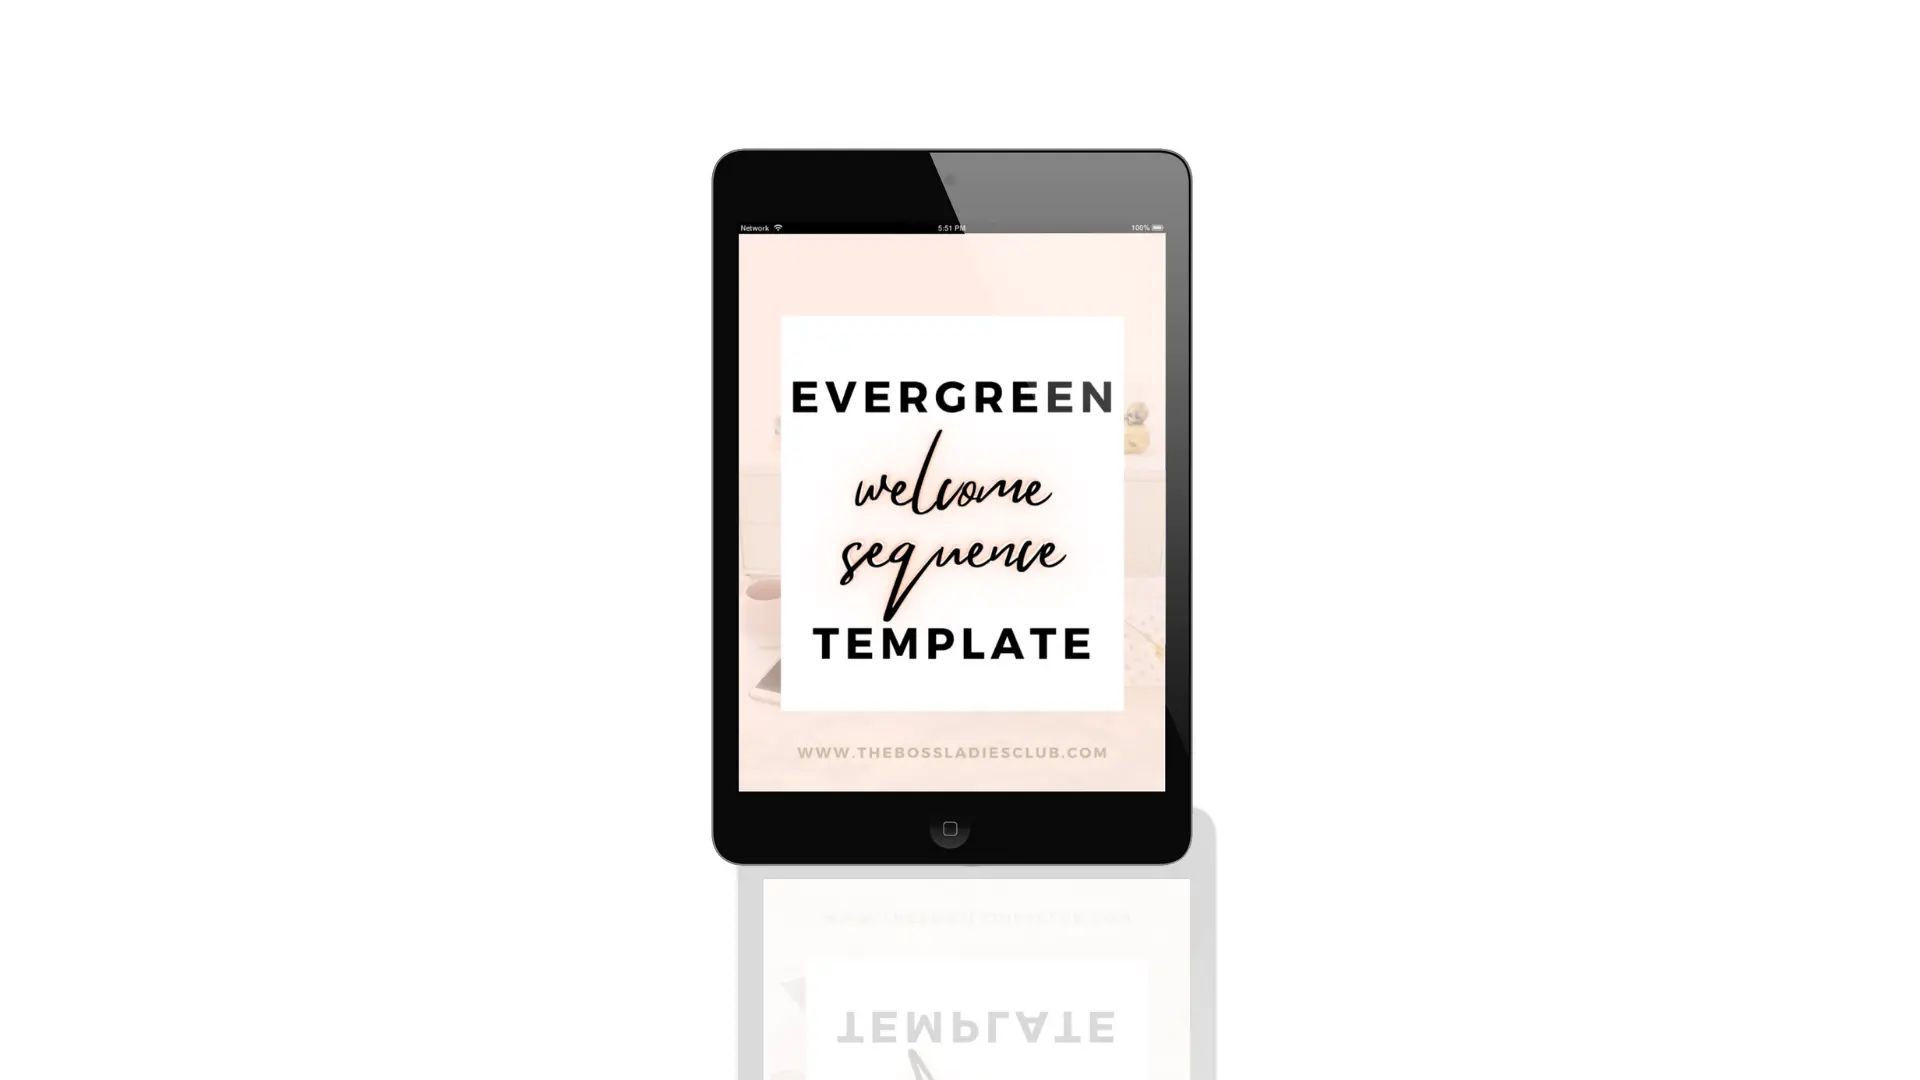 Evergreen welcome sequence template